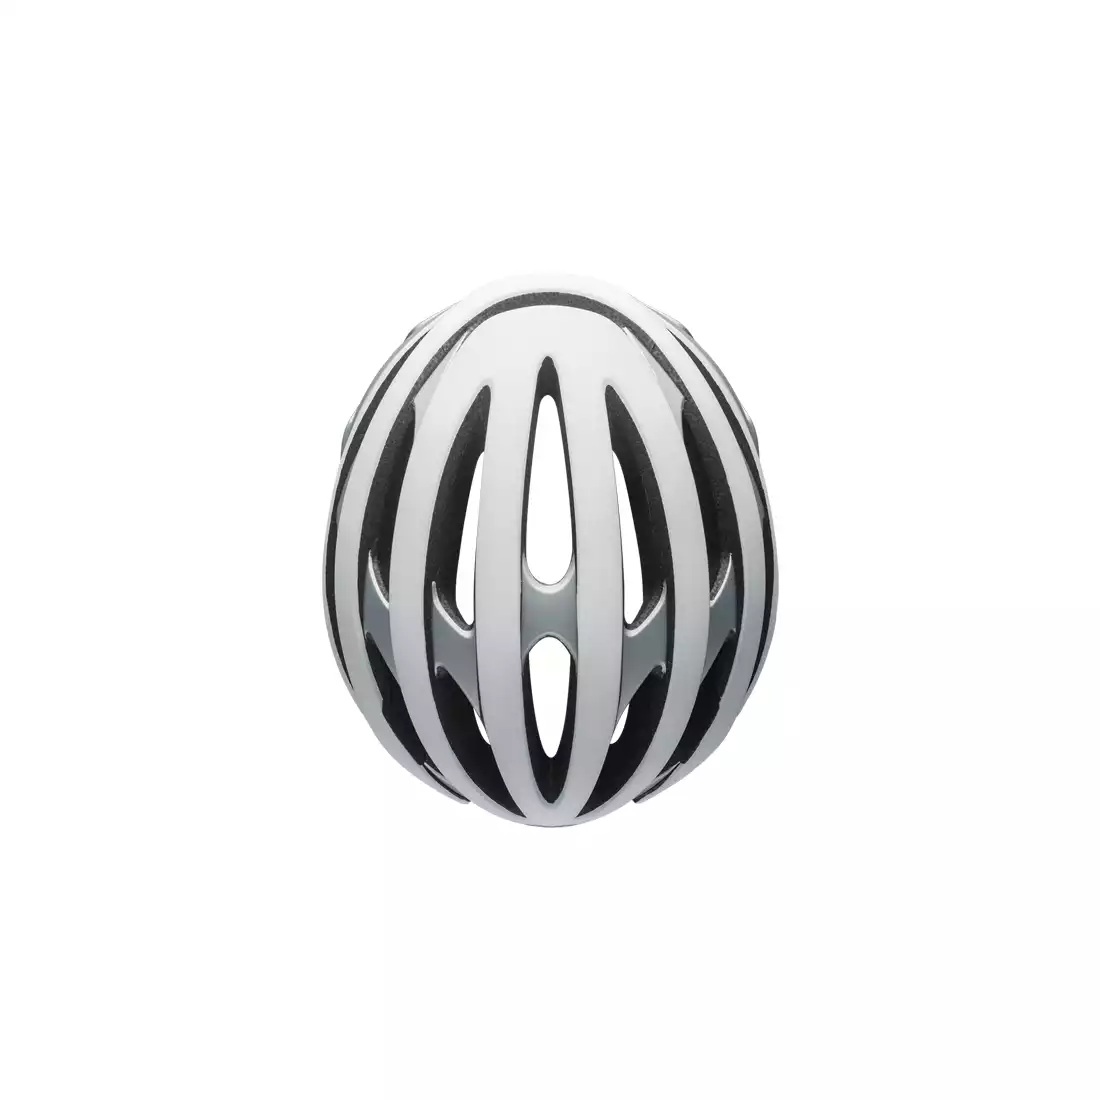 BELL STRATUS MIPS BEL-7078001 kask rowerowy matte white silver reflective